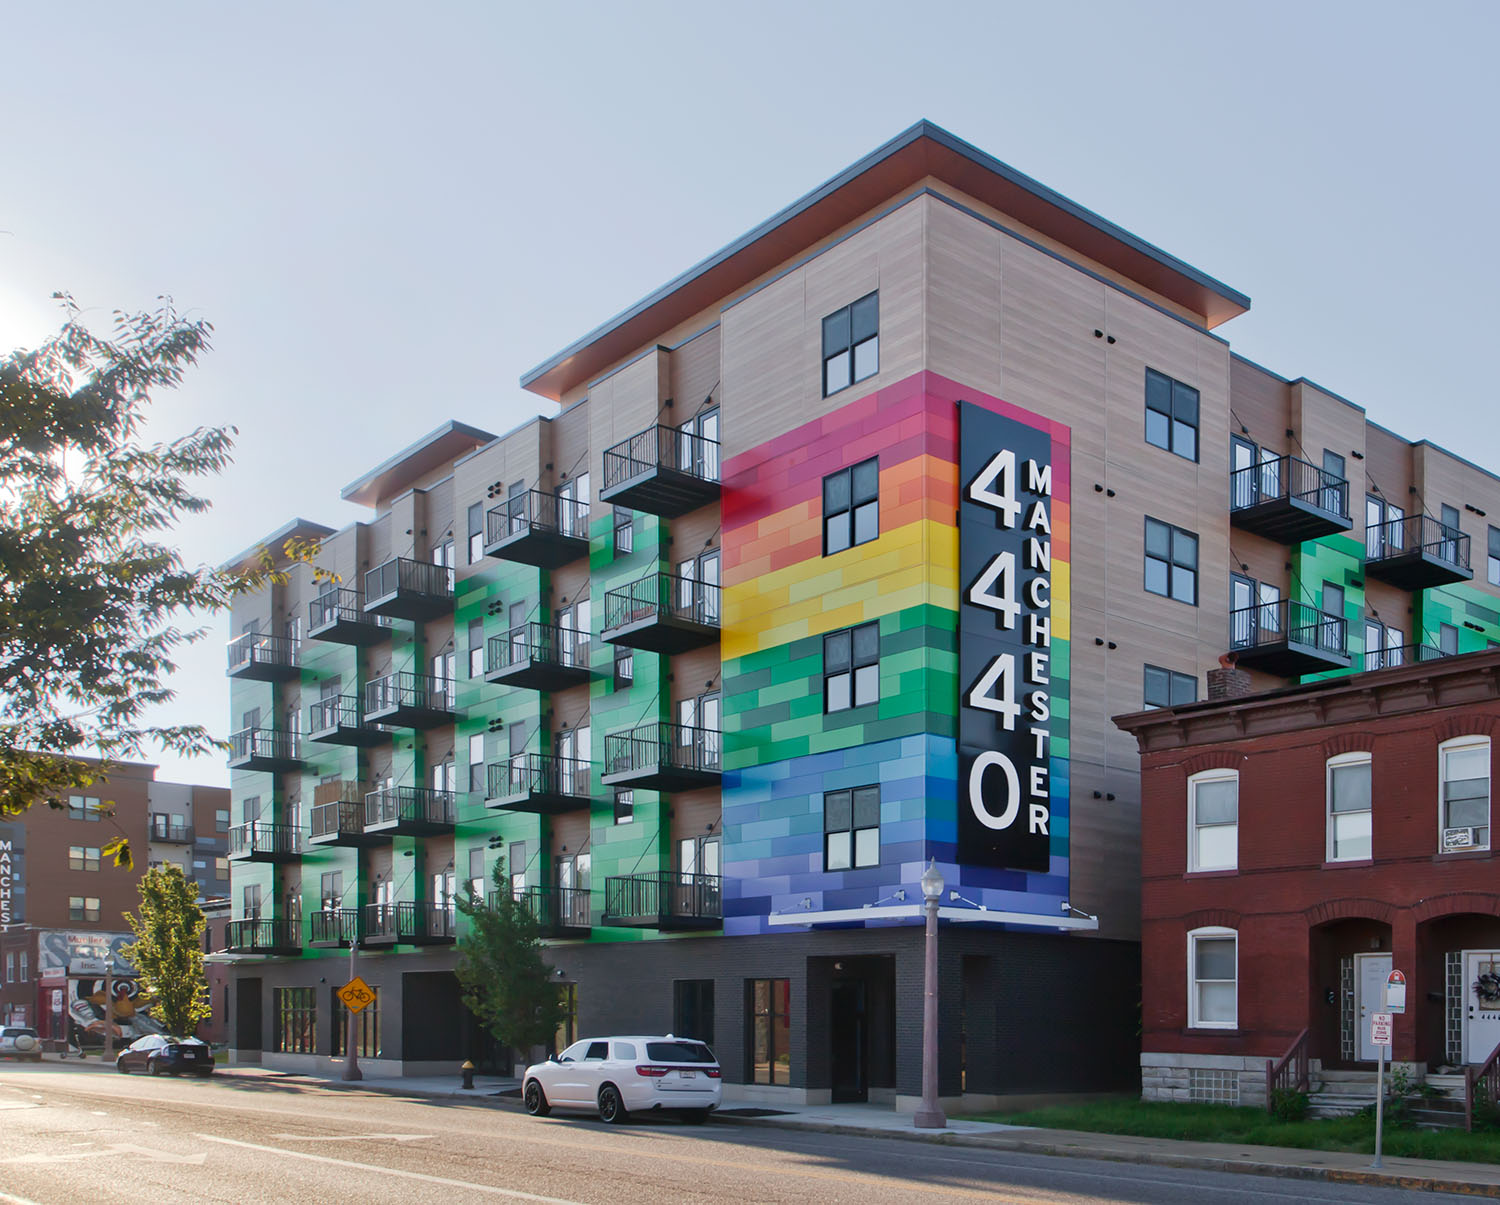 street view of 4440 manchester lofts with rainbow siding